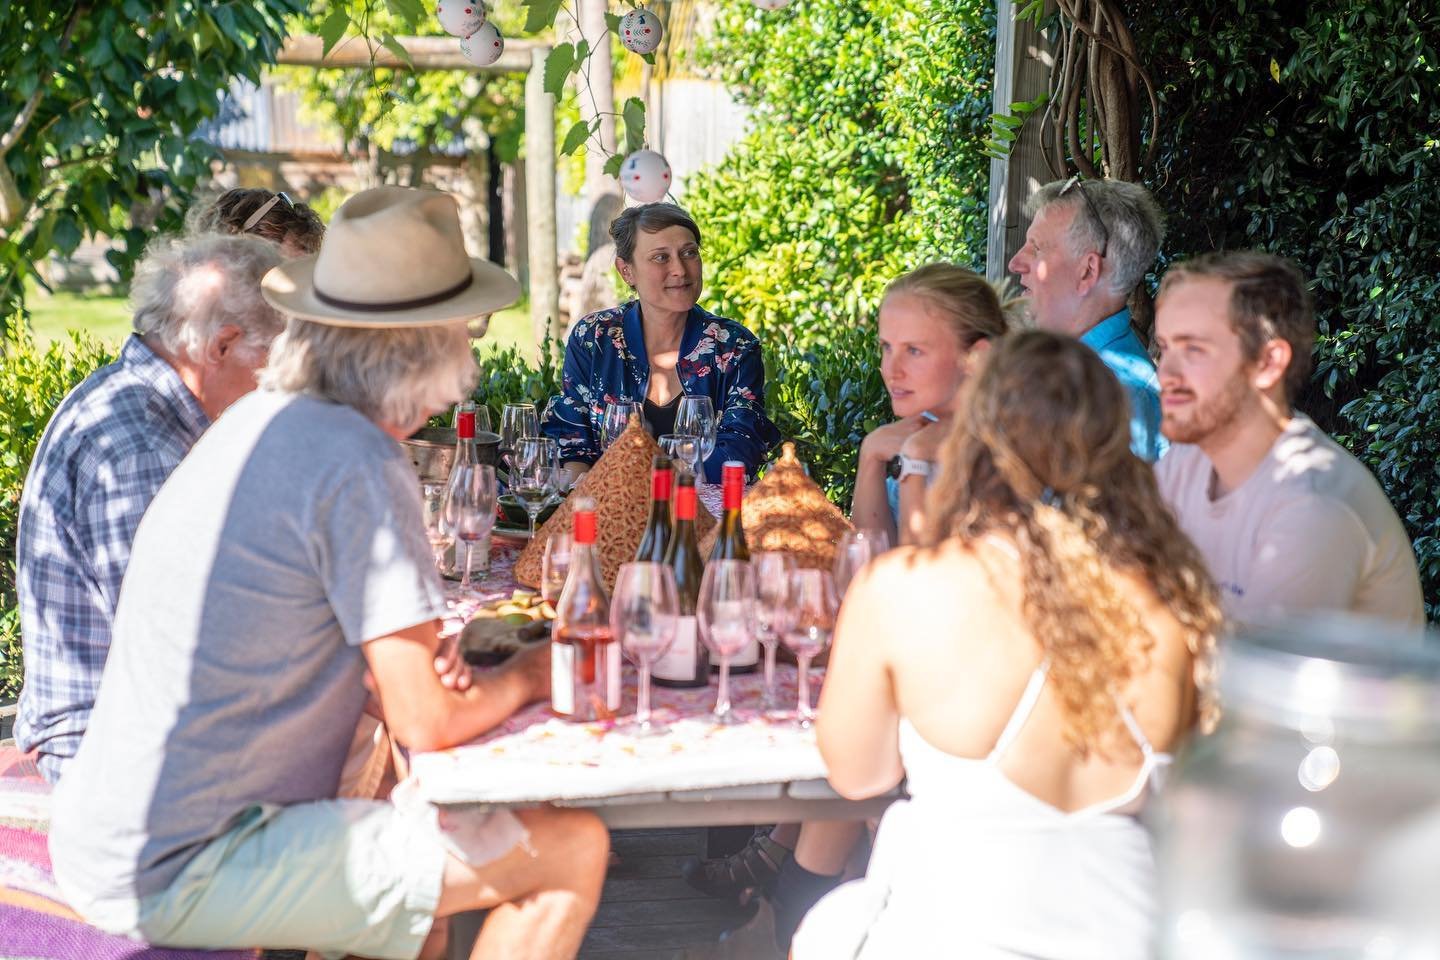 One of our absolute Chateau Garage highlights is working with such amazing hospo people across New Zealand. We love the energy, enthusiasm, laughter and passion they bring to tasting and pouring wine!

Next week Ollie is in Auckland and Tauranga so i